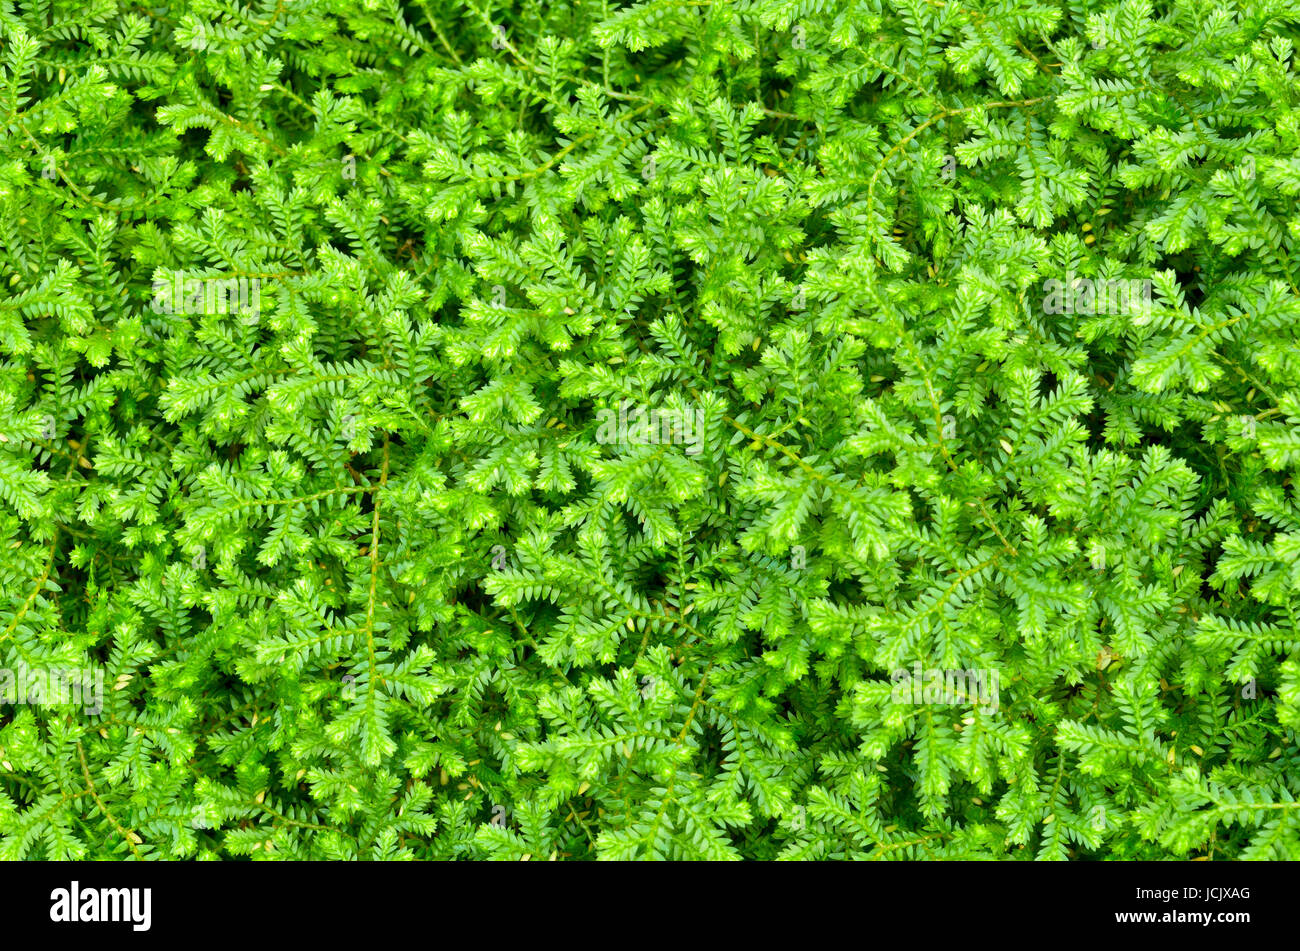 Selaginella kraussiana ( Trailing Selaginella ), Small plants with bright green leaves grown as ornamental for ground cover Stock Photo